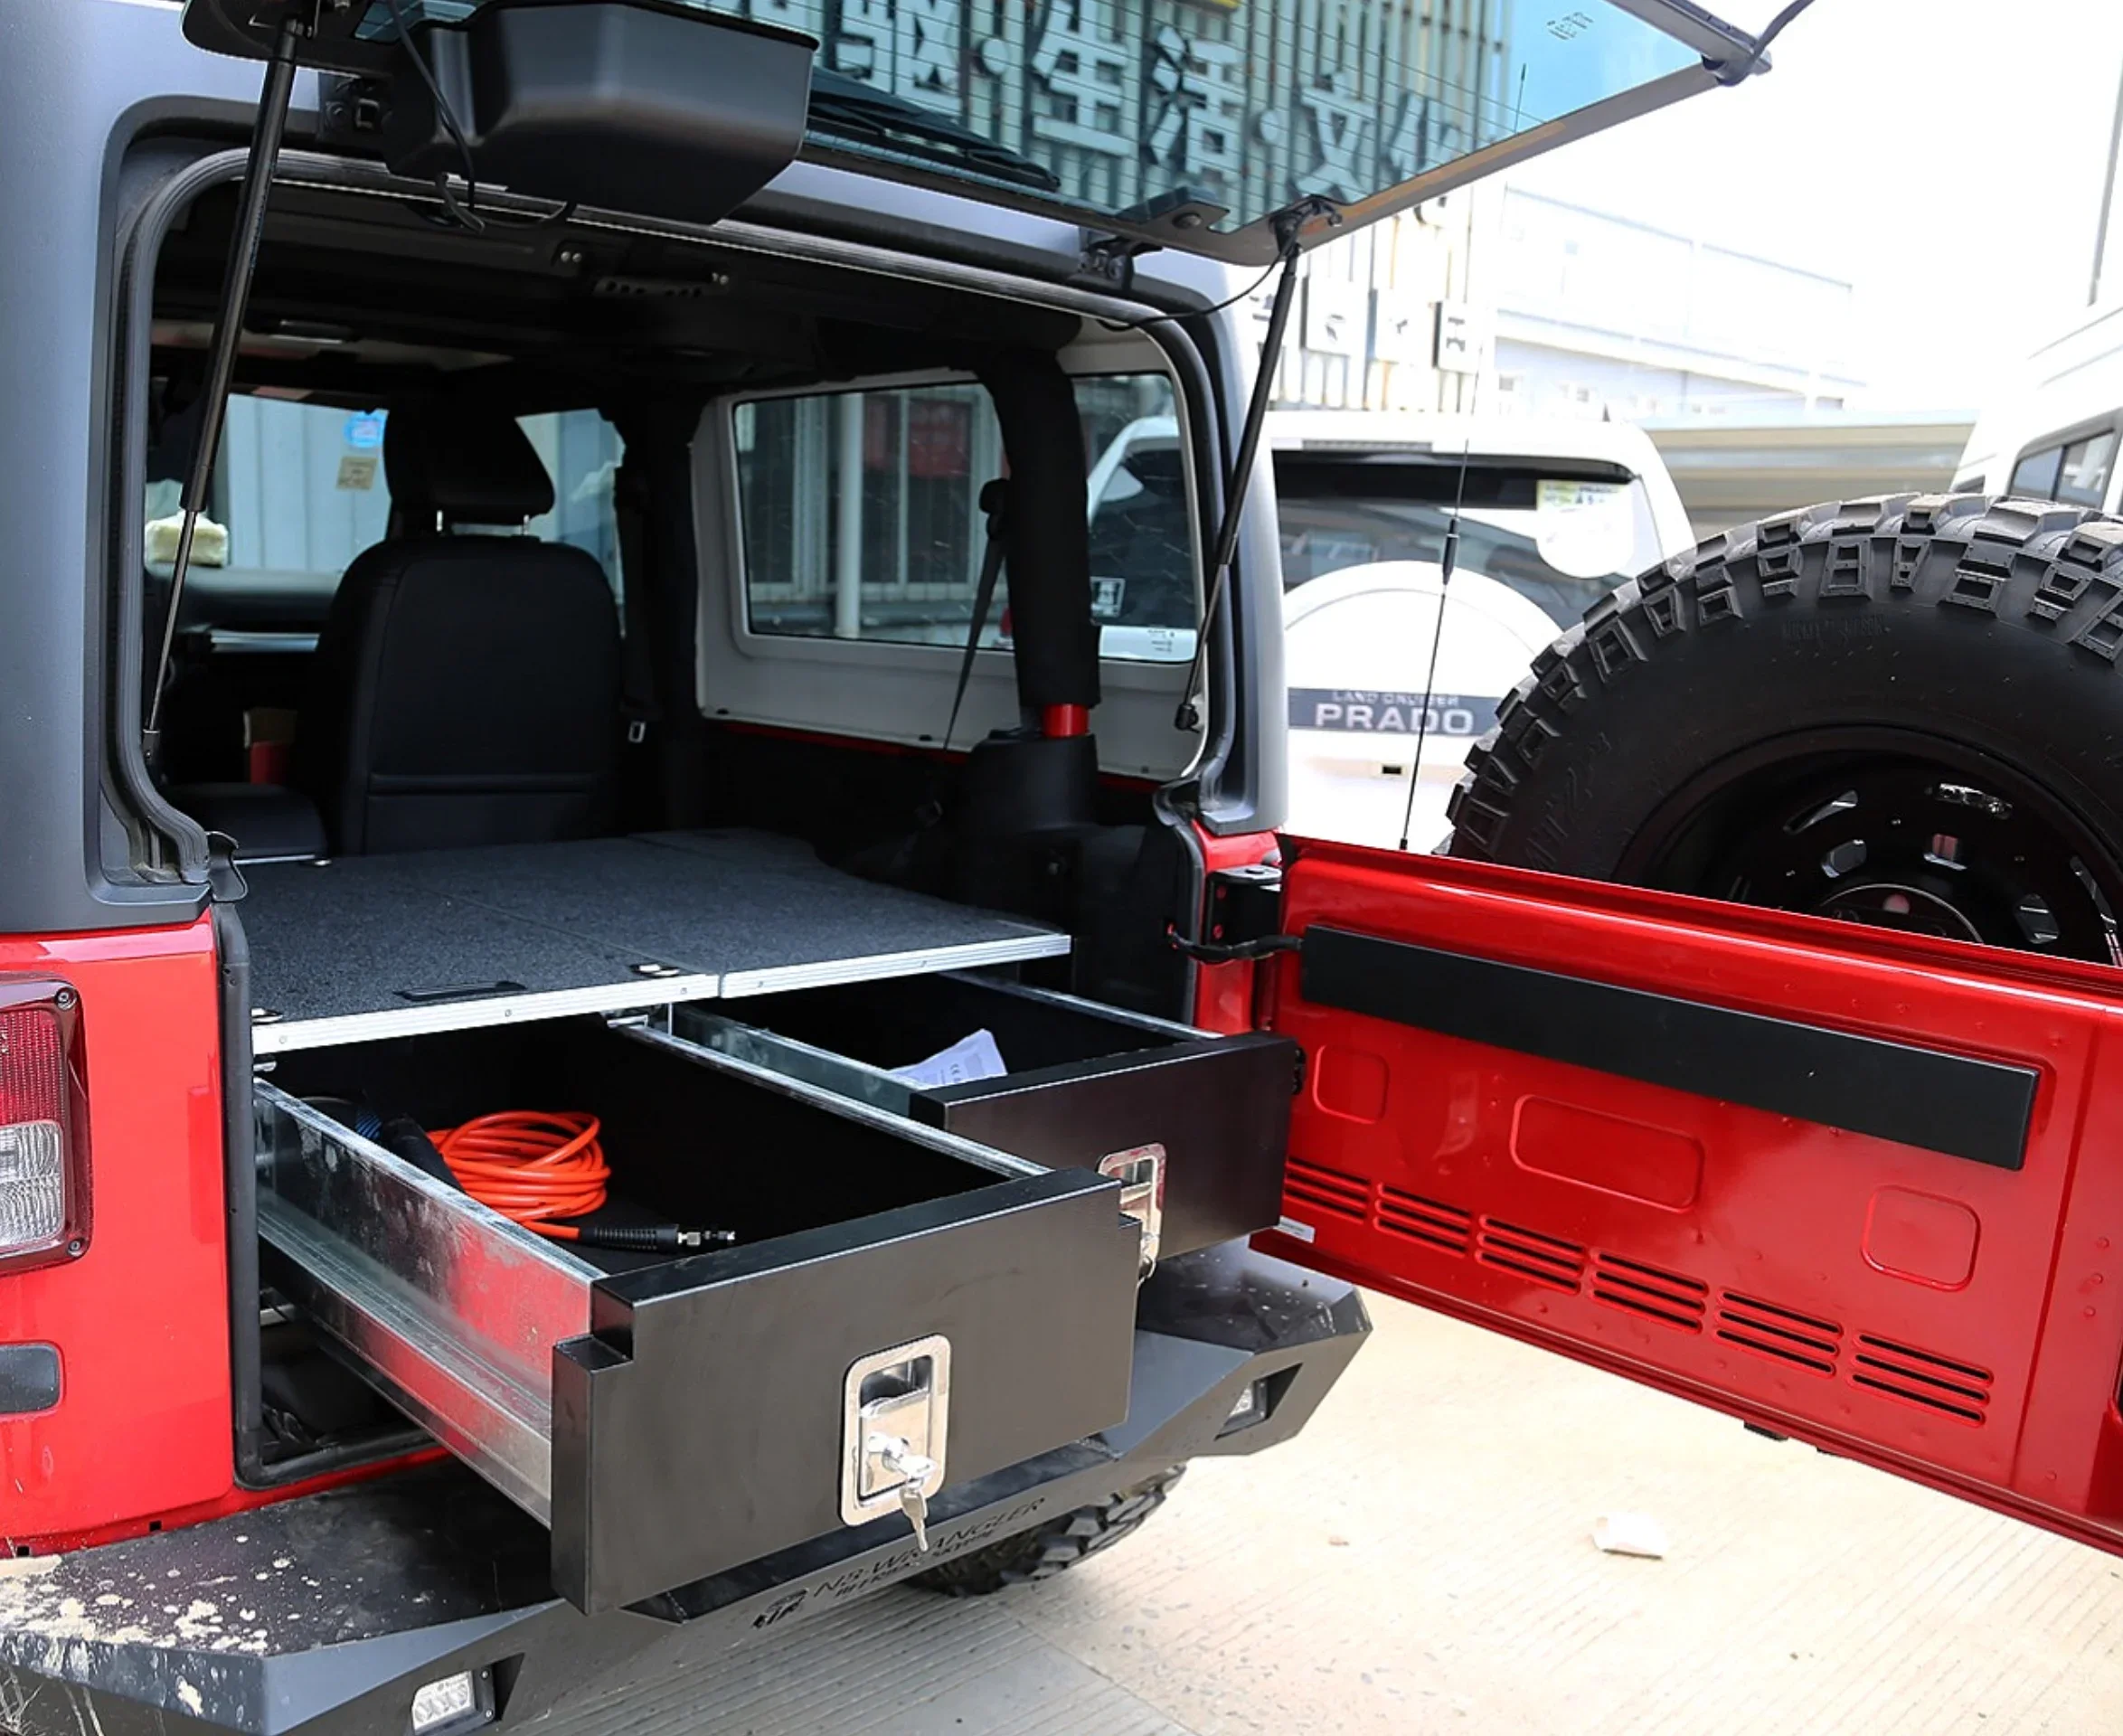 Odm 4X4 Aluminum Drawer Box System Suv Pickup Truck Slide Out Storage Patrol Y62 Landcruiser Lc105 Series Rear Drawers